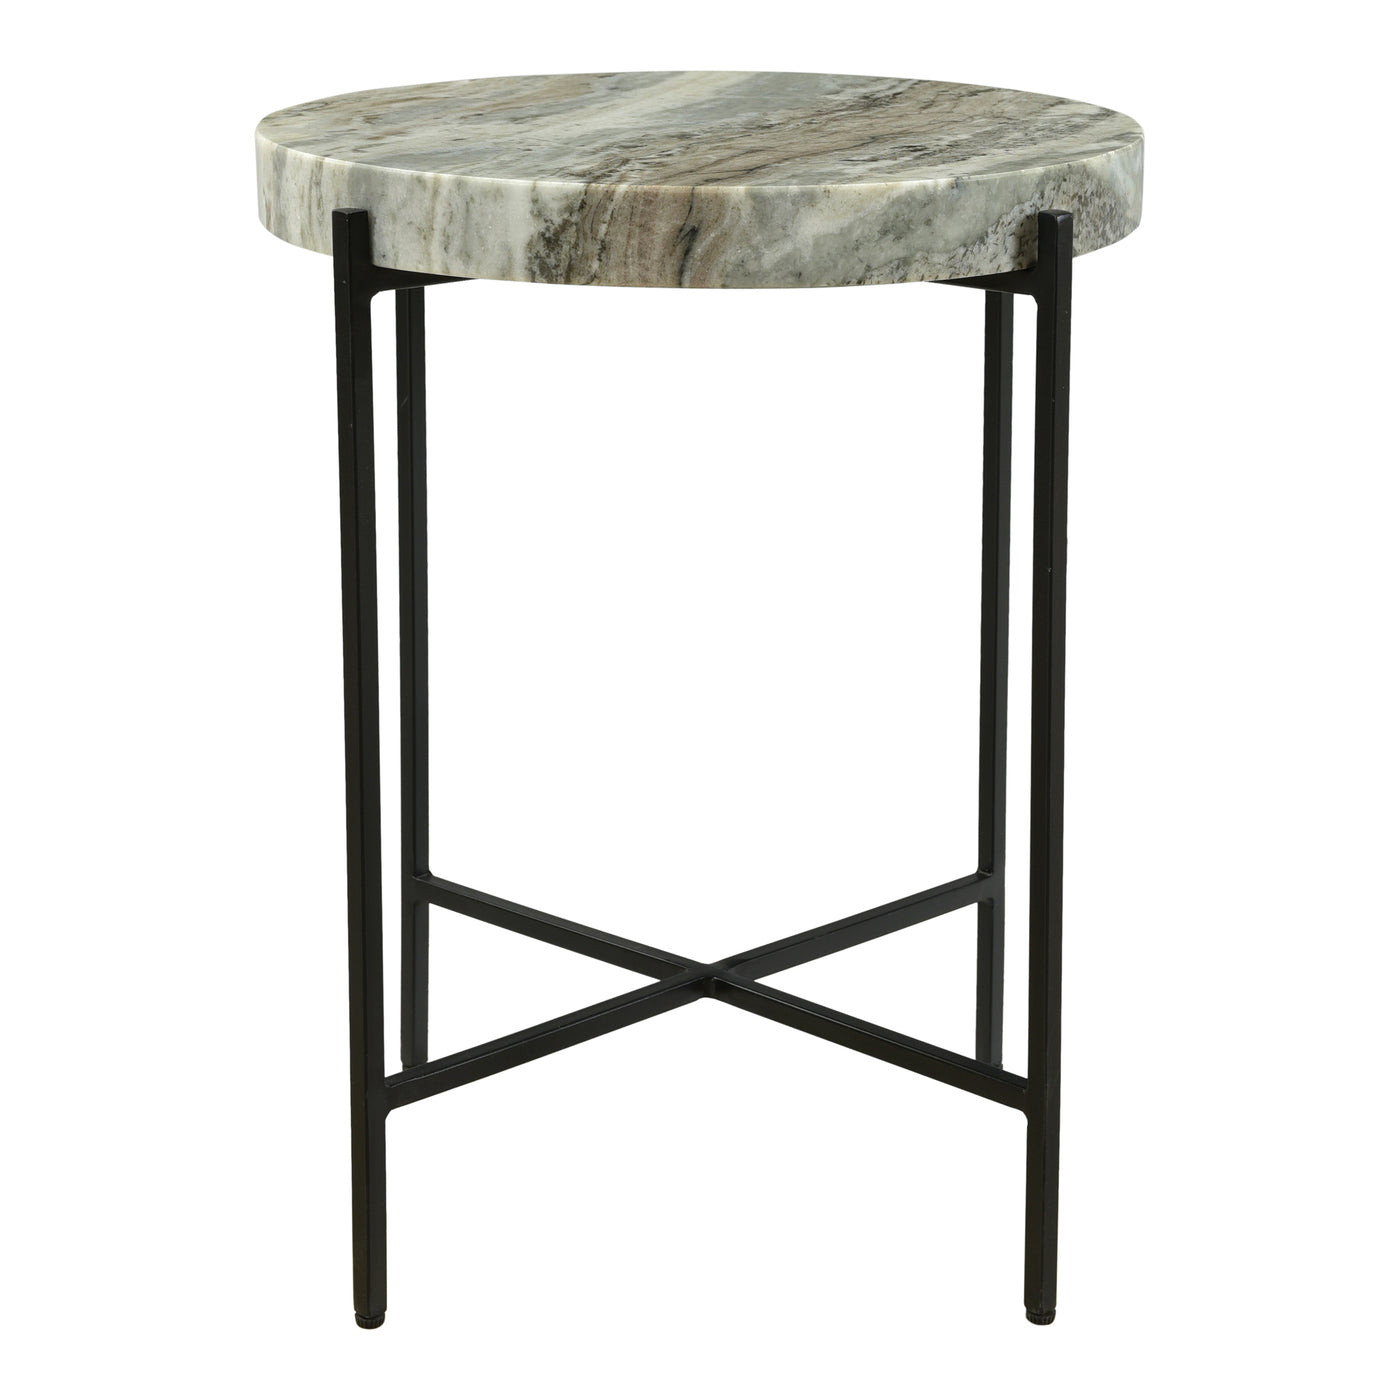 A generous slab of polished marble sits atop a solid iron frame to create the Cirque accent table. Everyone needs a stylis...